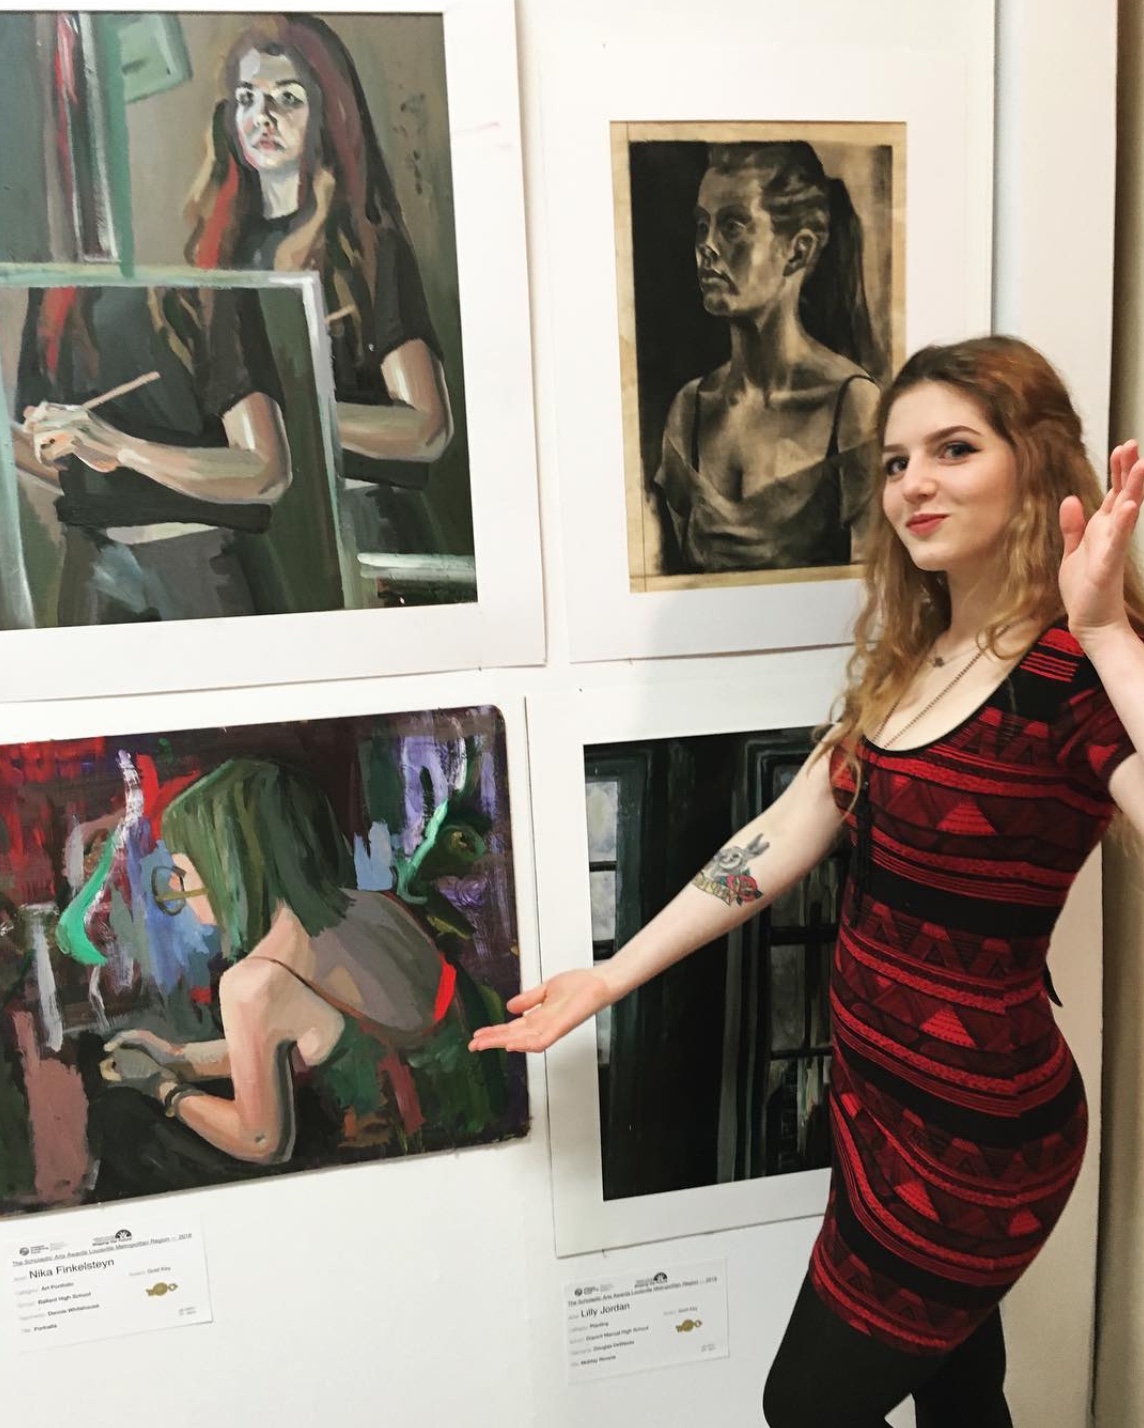 Nika posed in front of pieces in gallery show